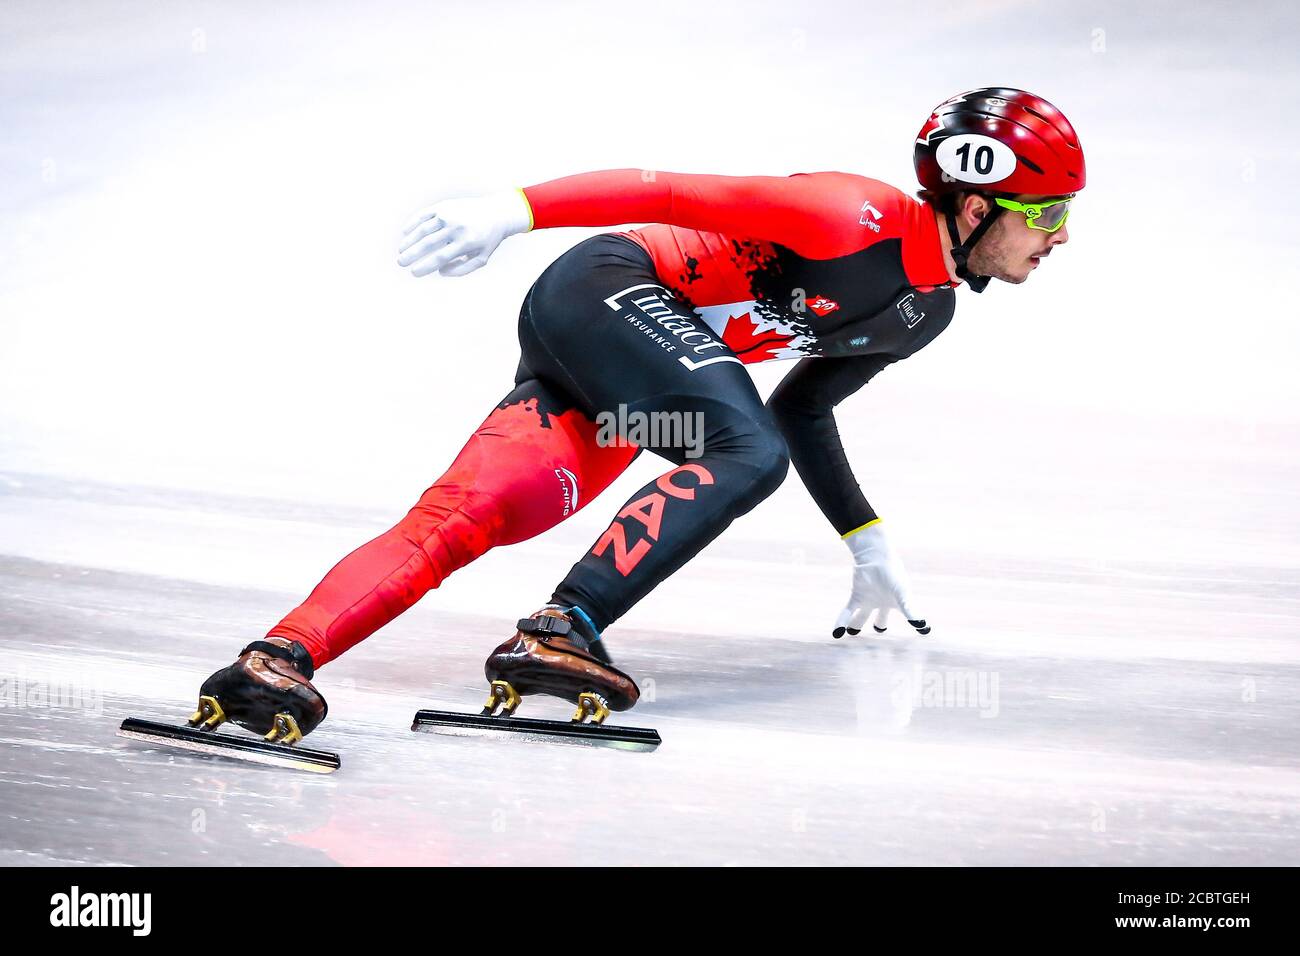 Dresden, Germany, February 02, 2019: Canadian speed skater Samuel Girard competes during the ISU Short Track Speed Skating World Championship Stock Photo